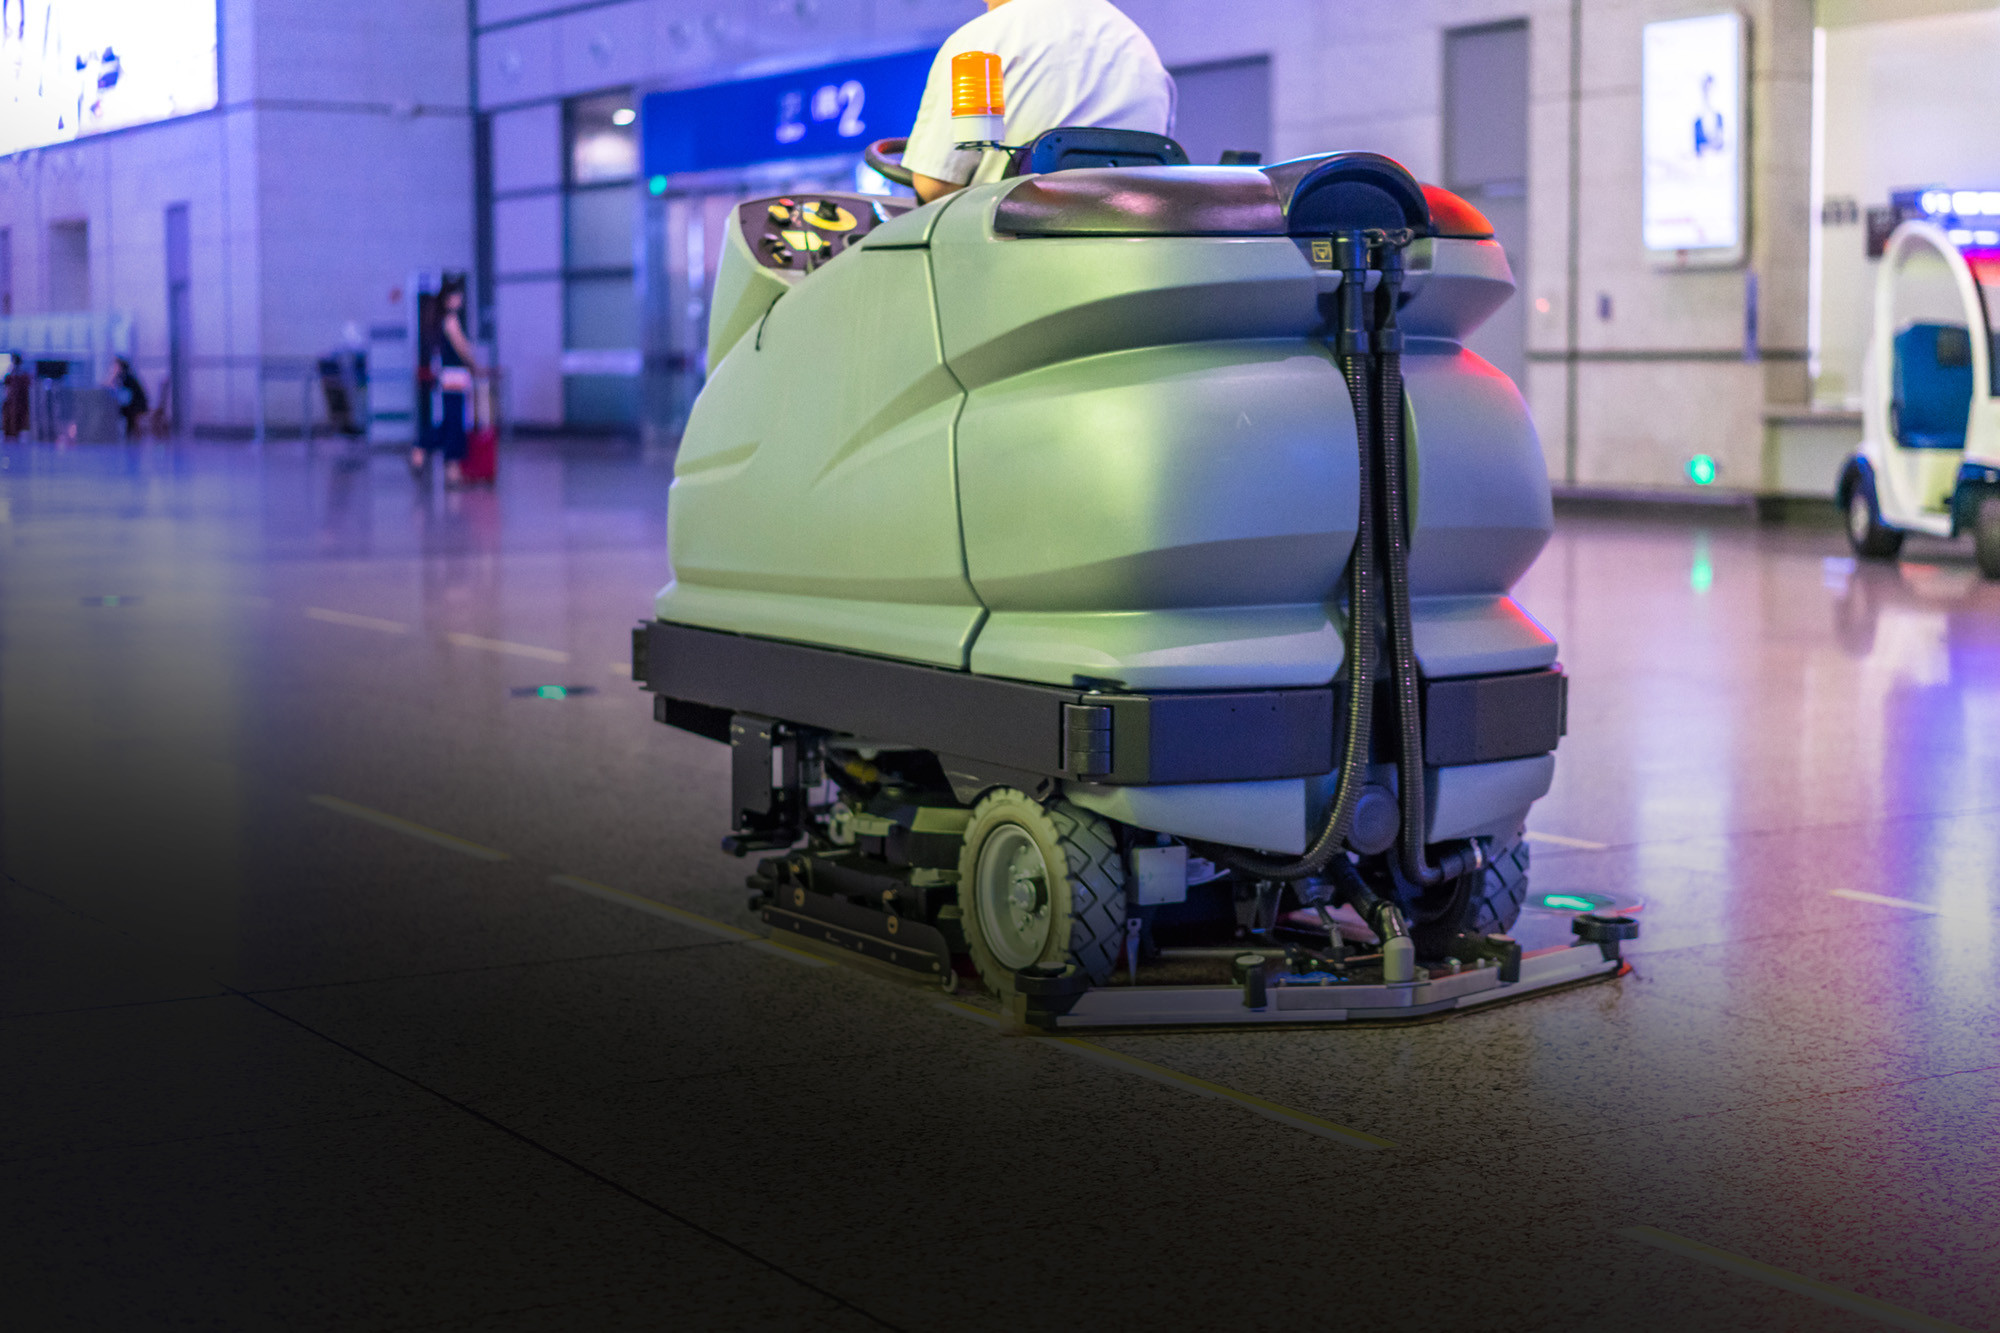 A green electric cleaning machine tidying up the industry floor